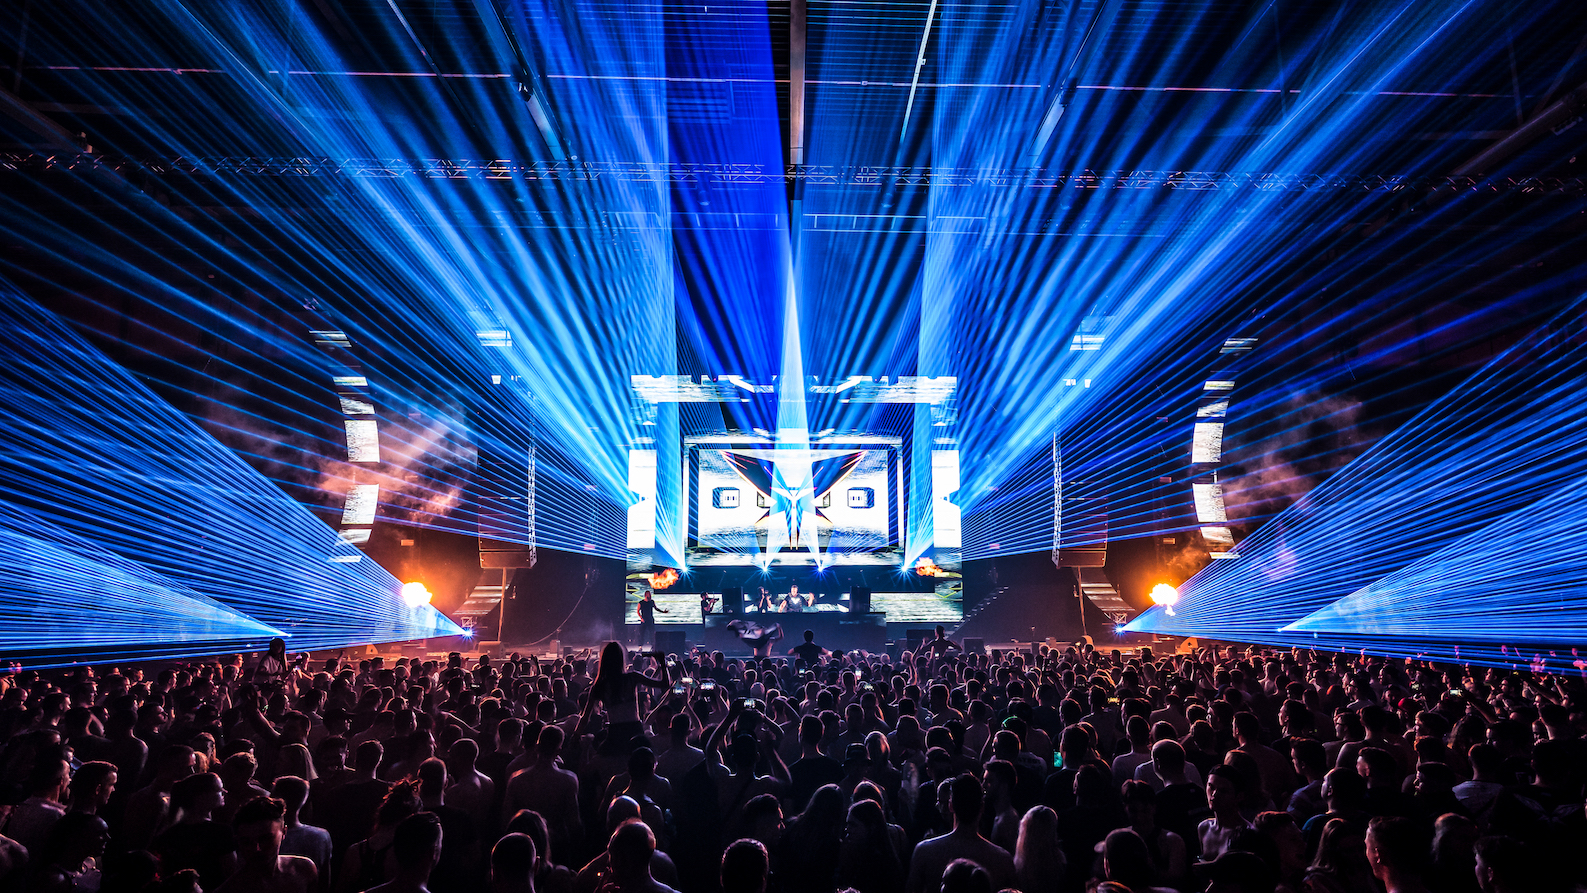 Radical Redemption – Brotherhood of Brutality photos now online!